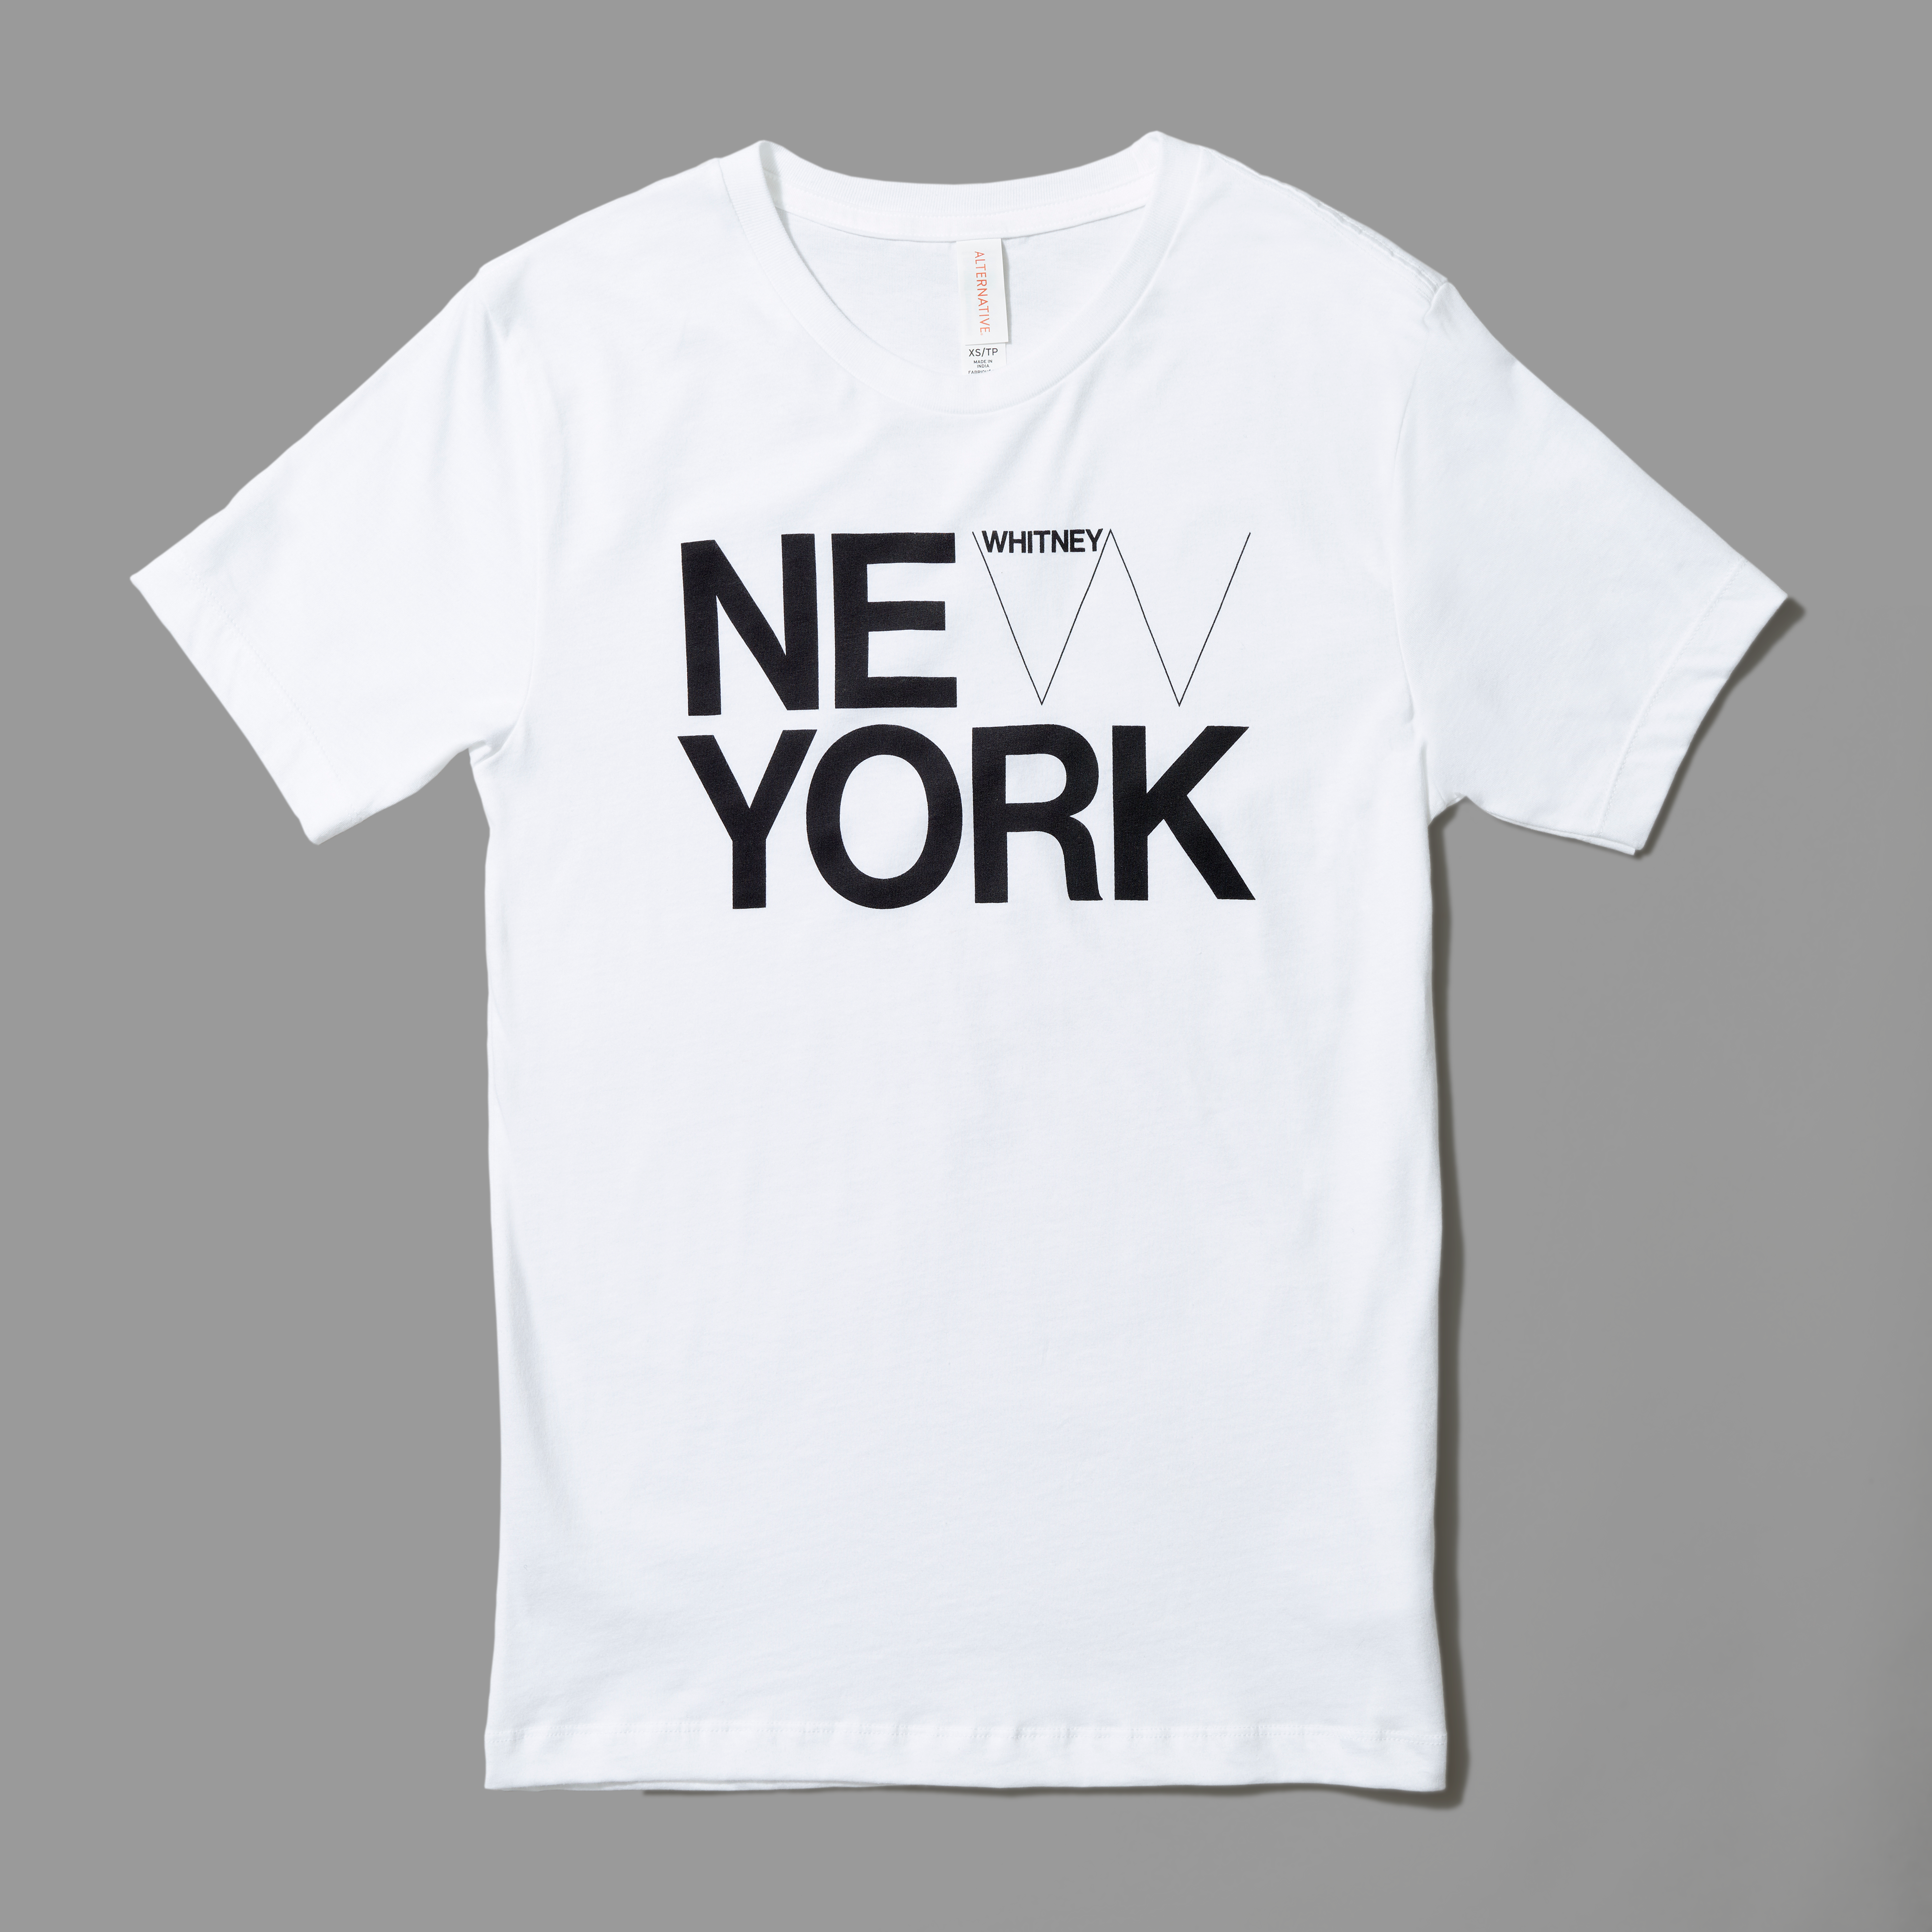 100% cotton white t-shirt with New York and the Whitney logo screen printed in black text